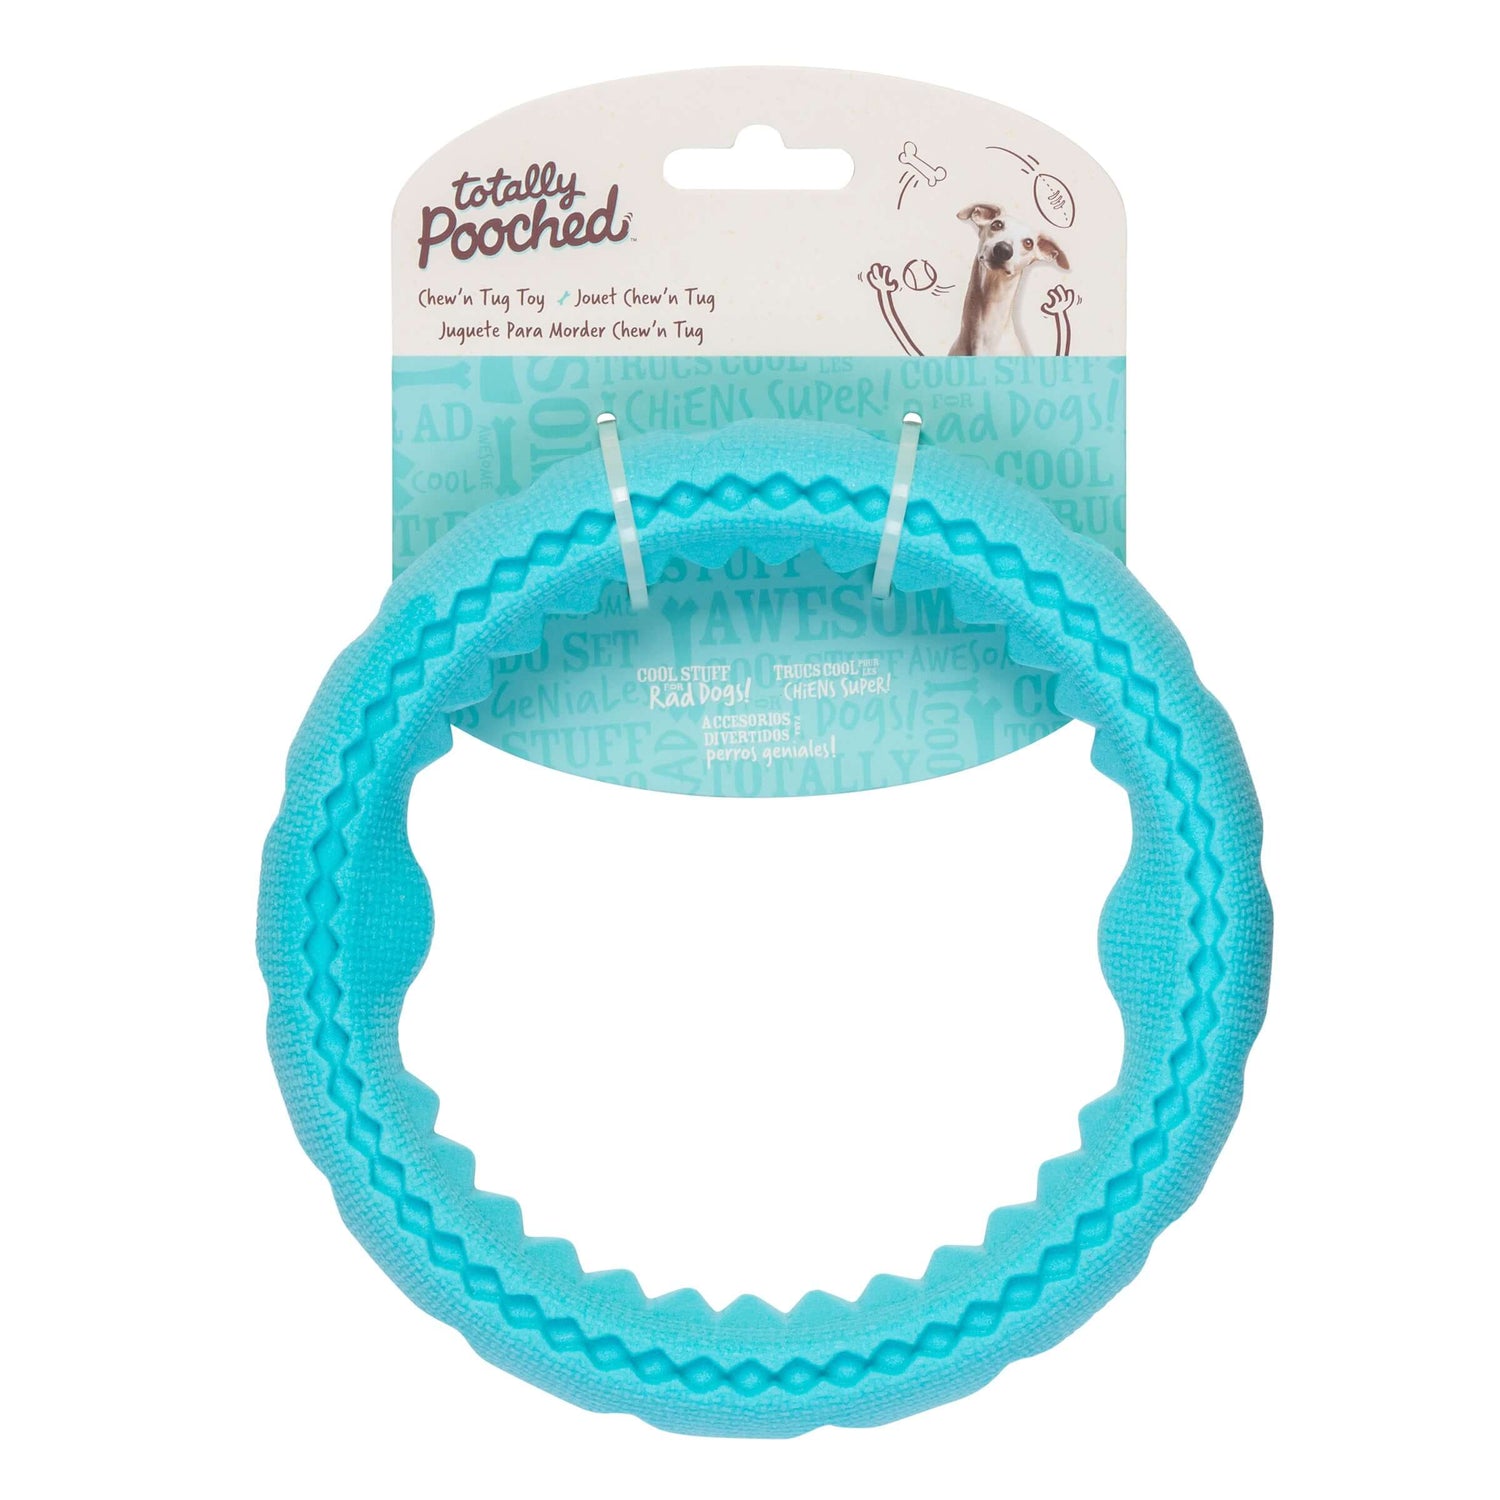 Flexible durable dog toy for chewing.  Great for bouncing or playing.